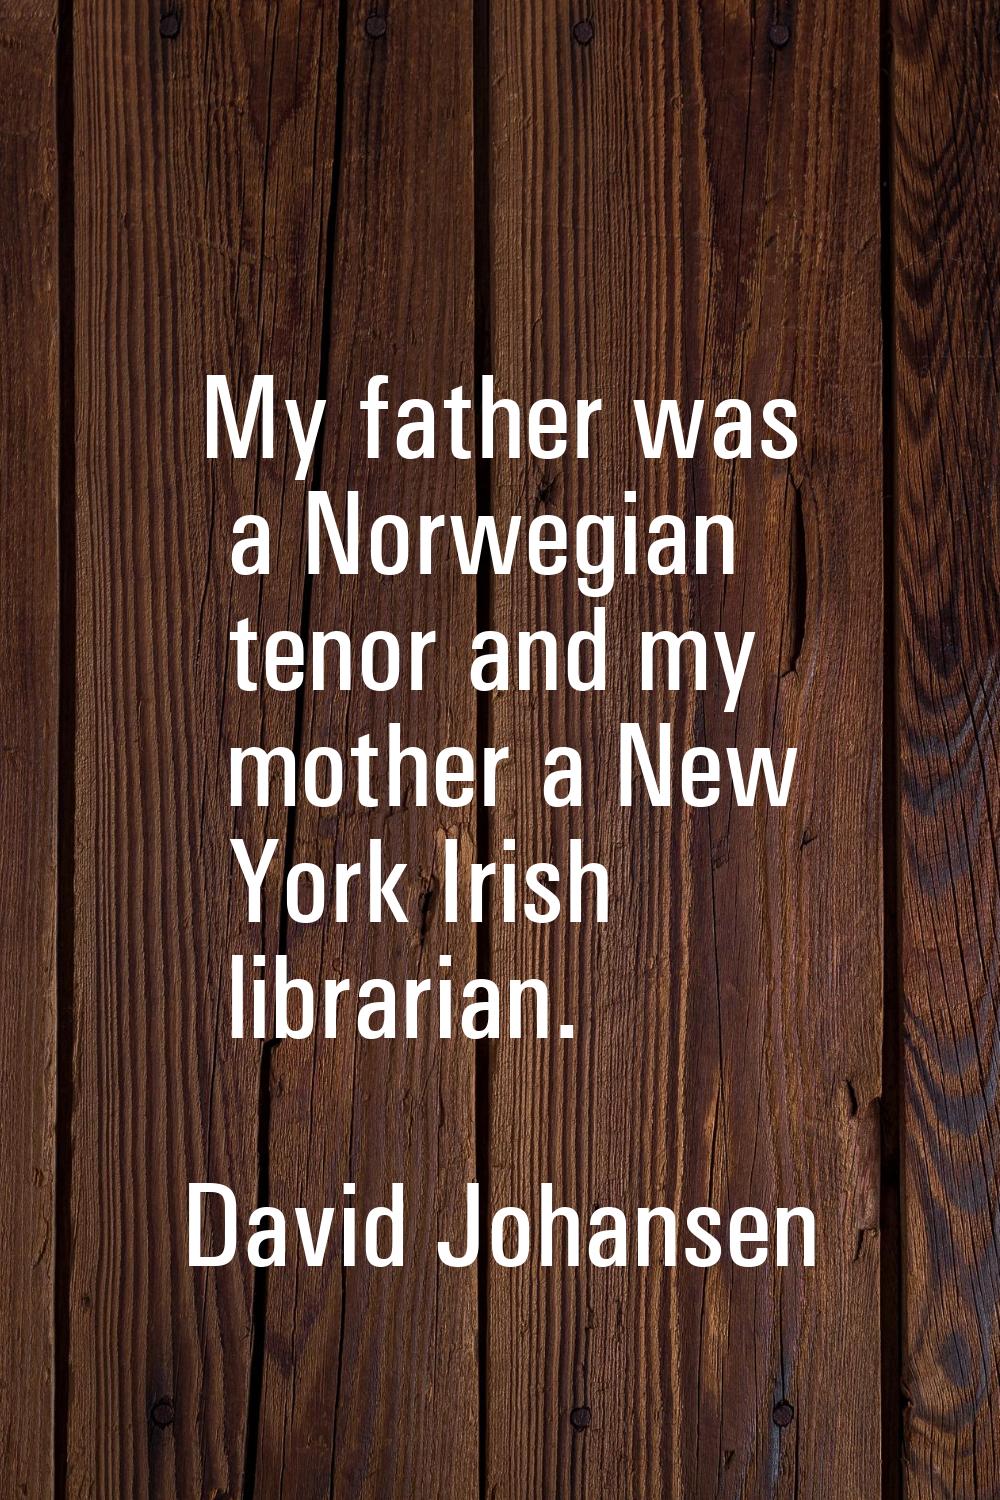 My father was a Norwegian tenor and my mother a New York Irish librarian.